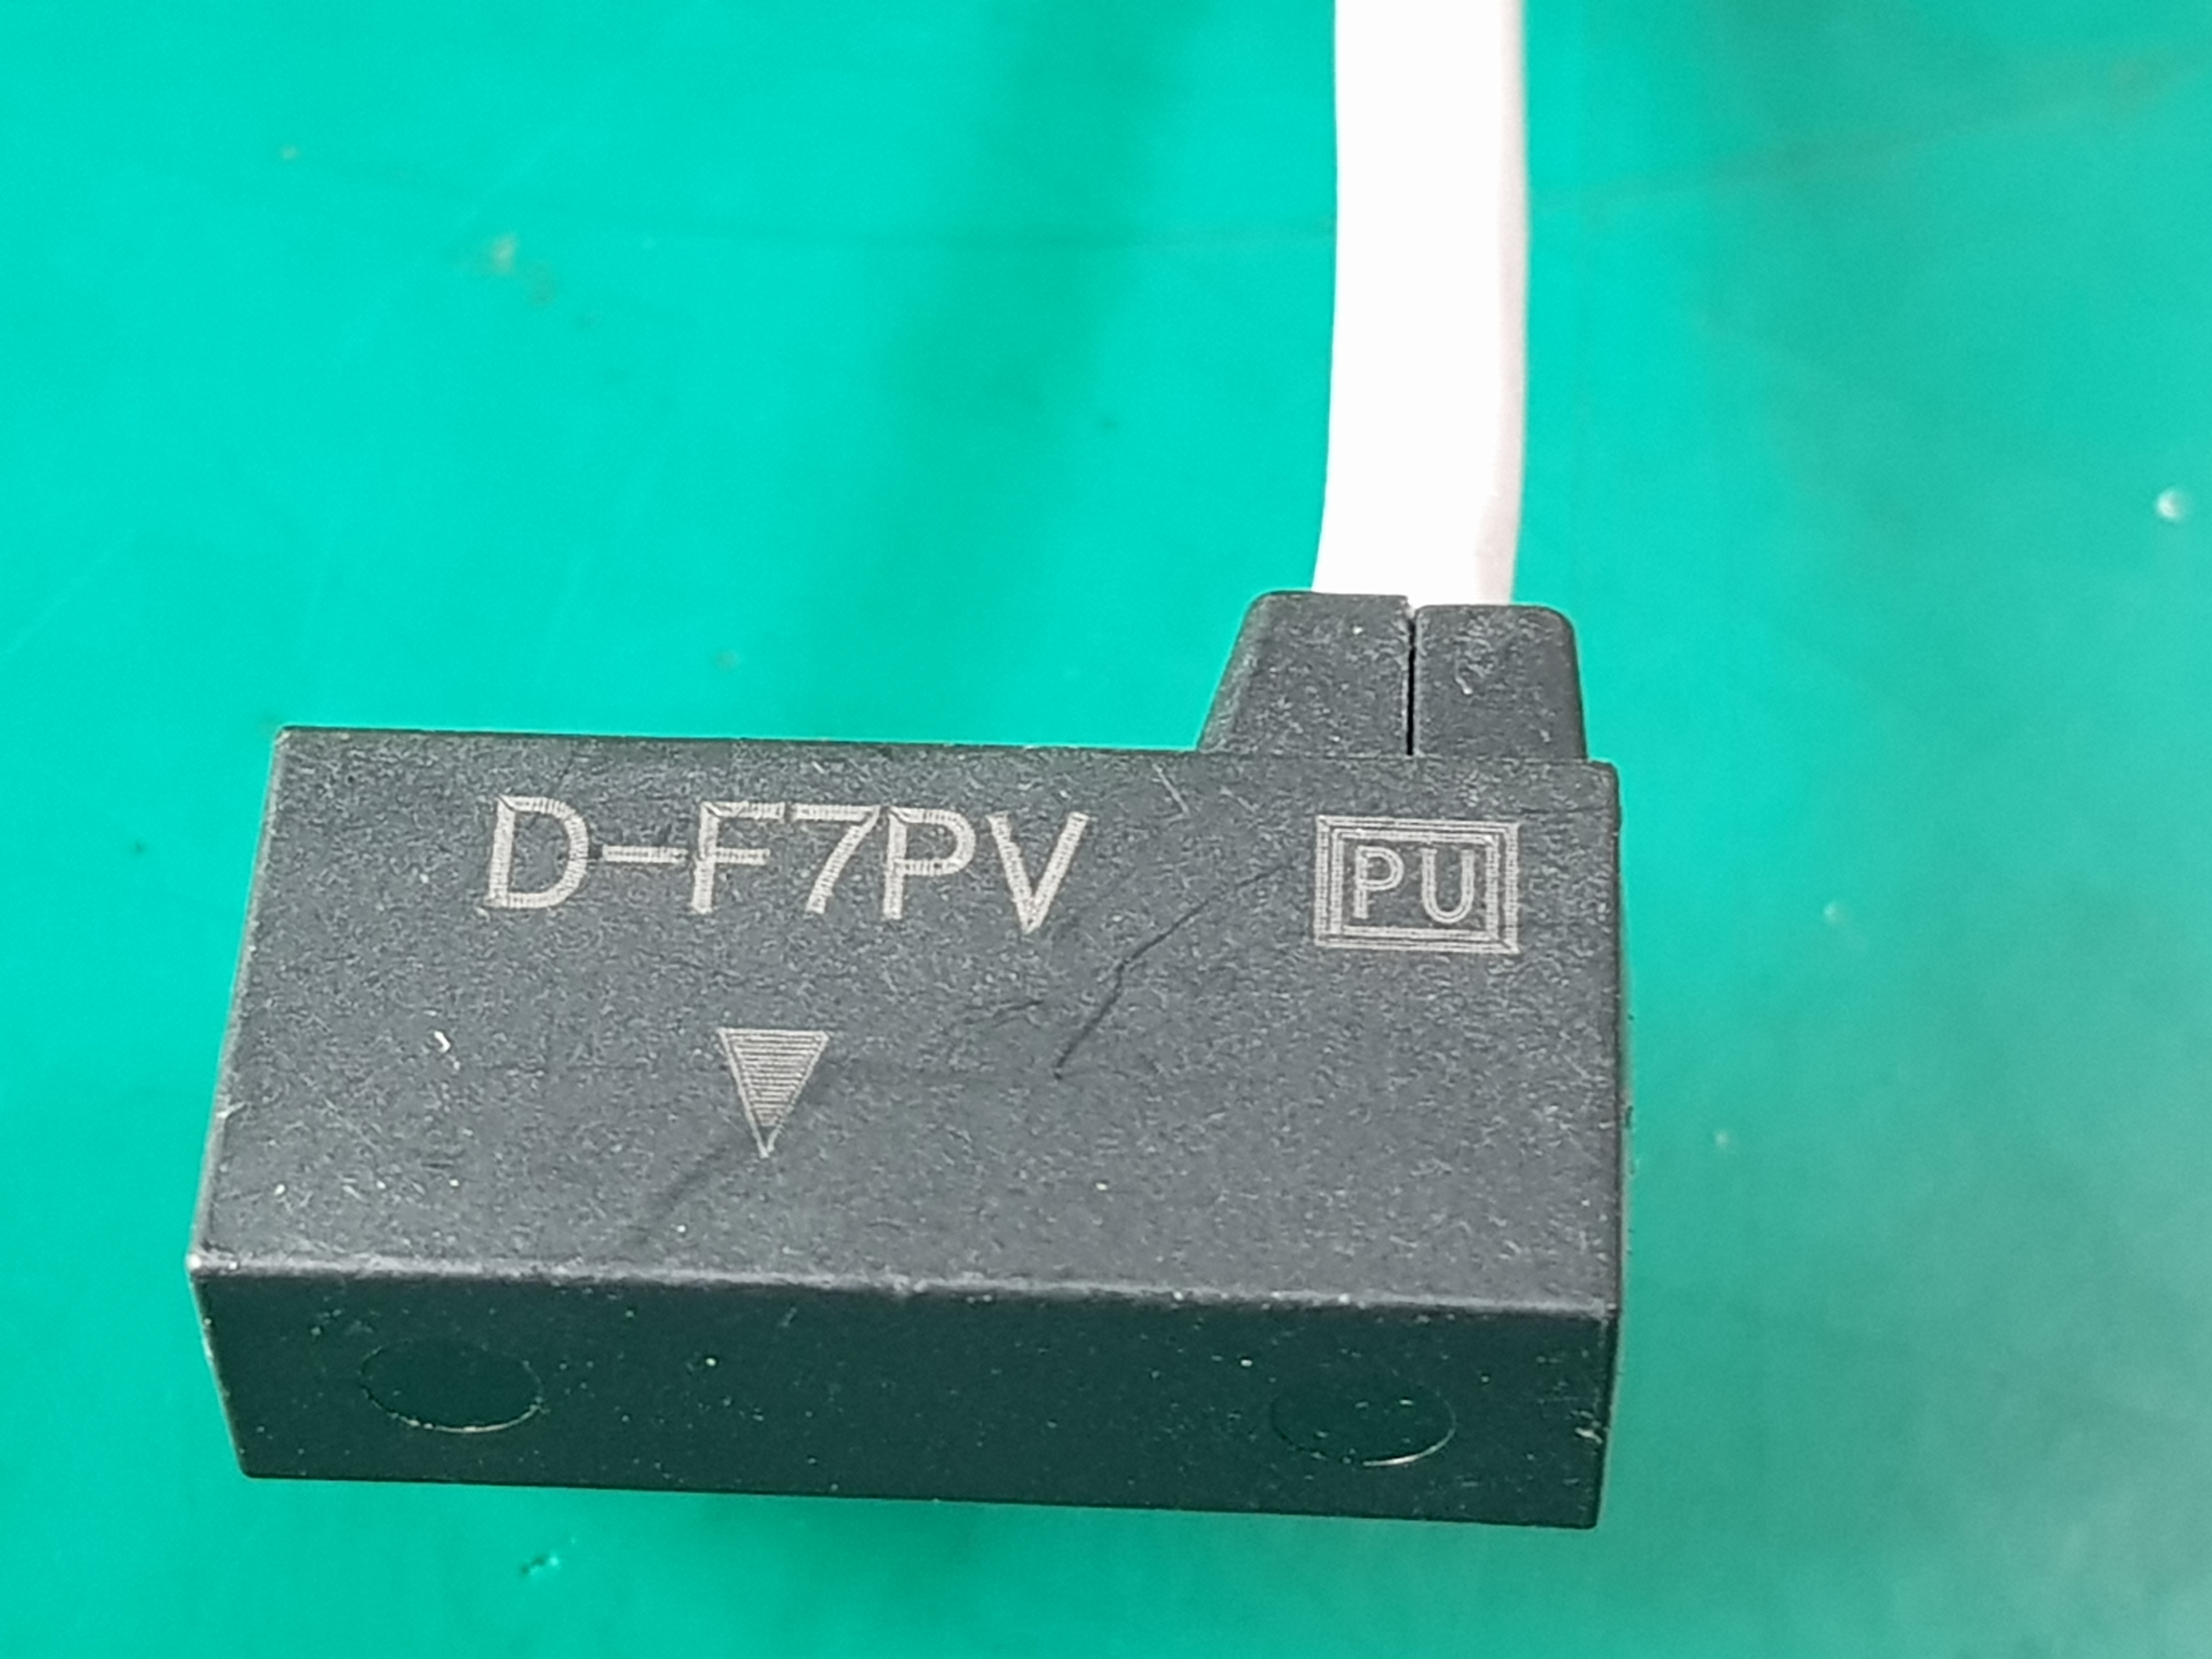 SMC Solid State D-F7PV PNP Rail Mount Auto-switch